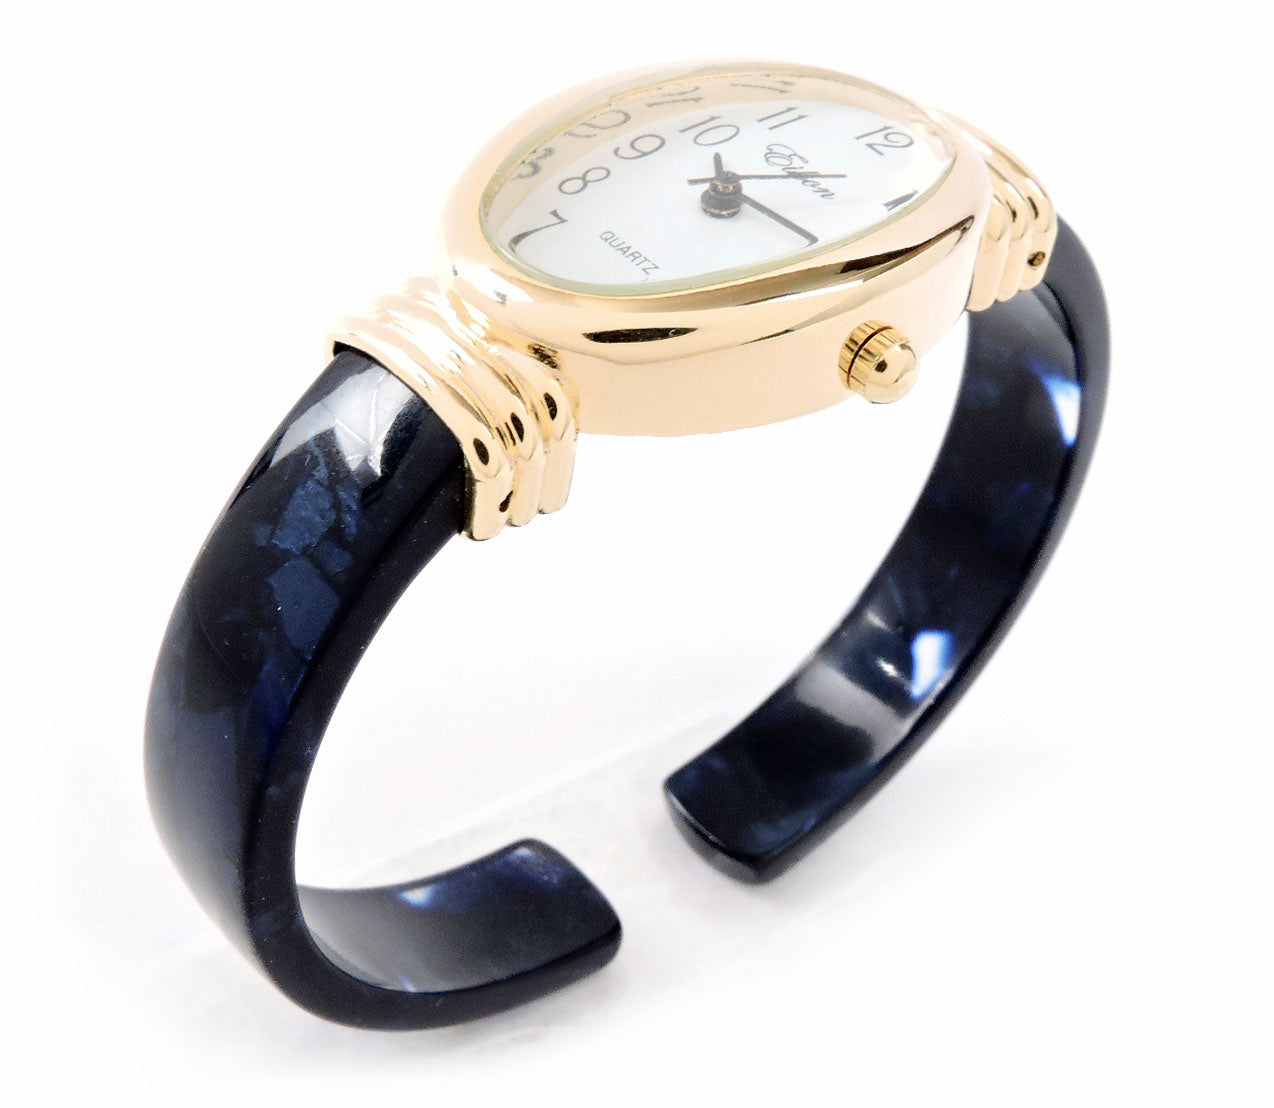 Tortoise Blue Acrylic Band with Gold Oval Case Women's Bangle Cuff WATCH